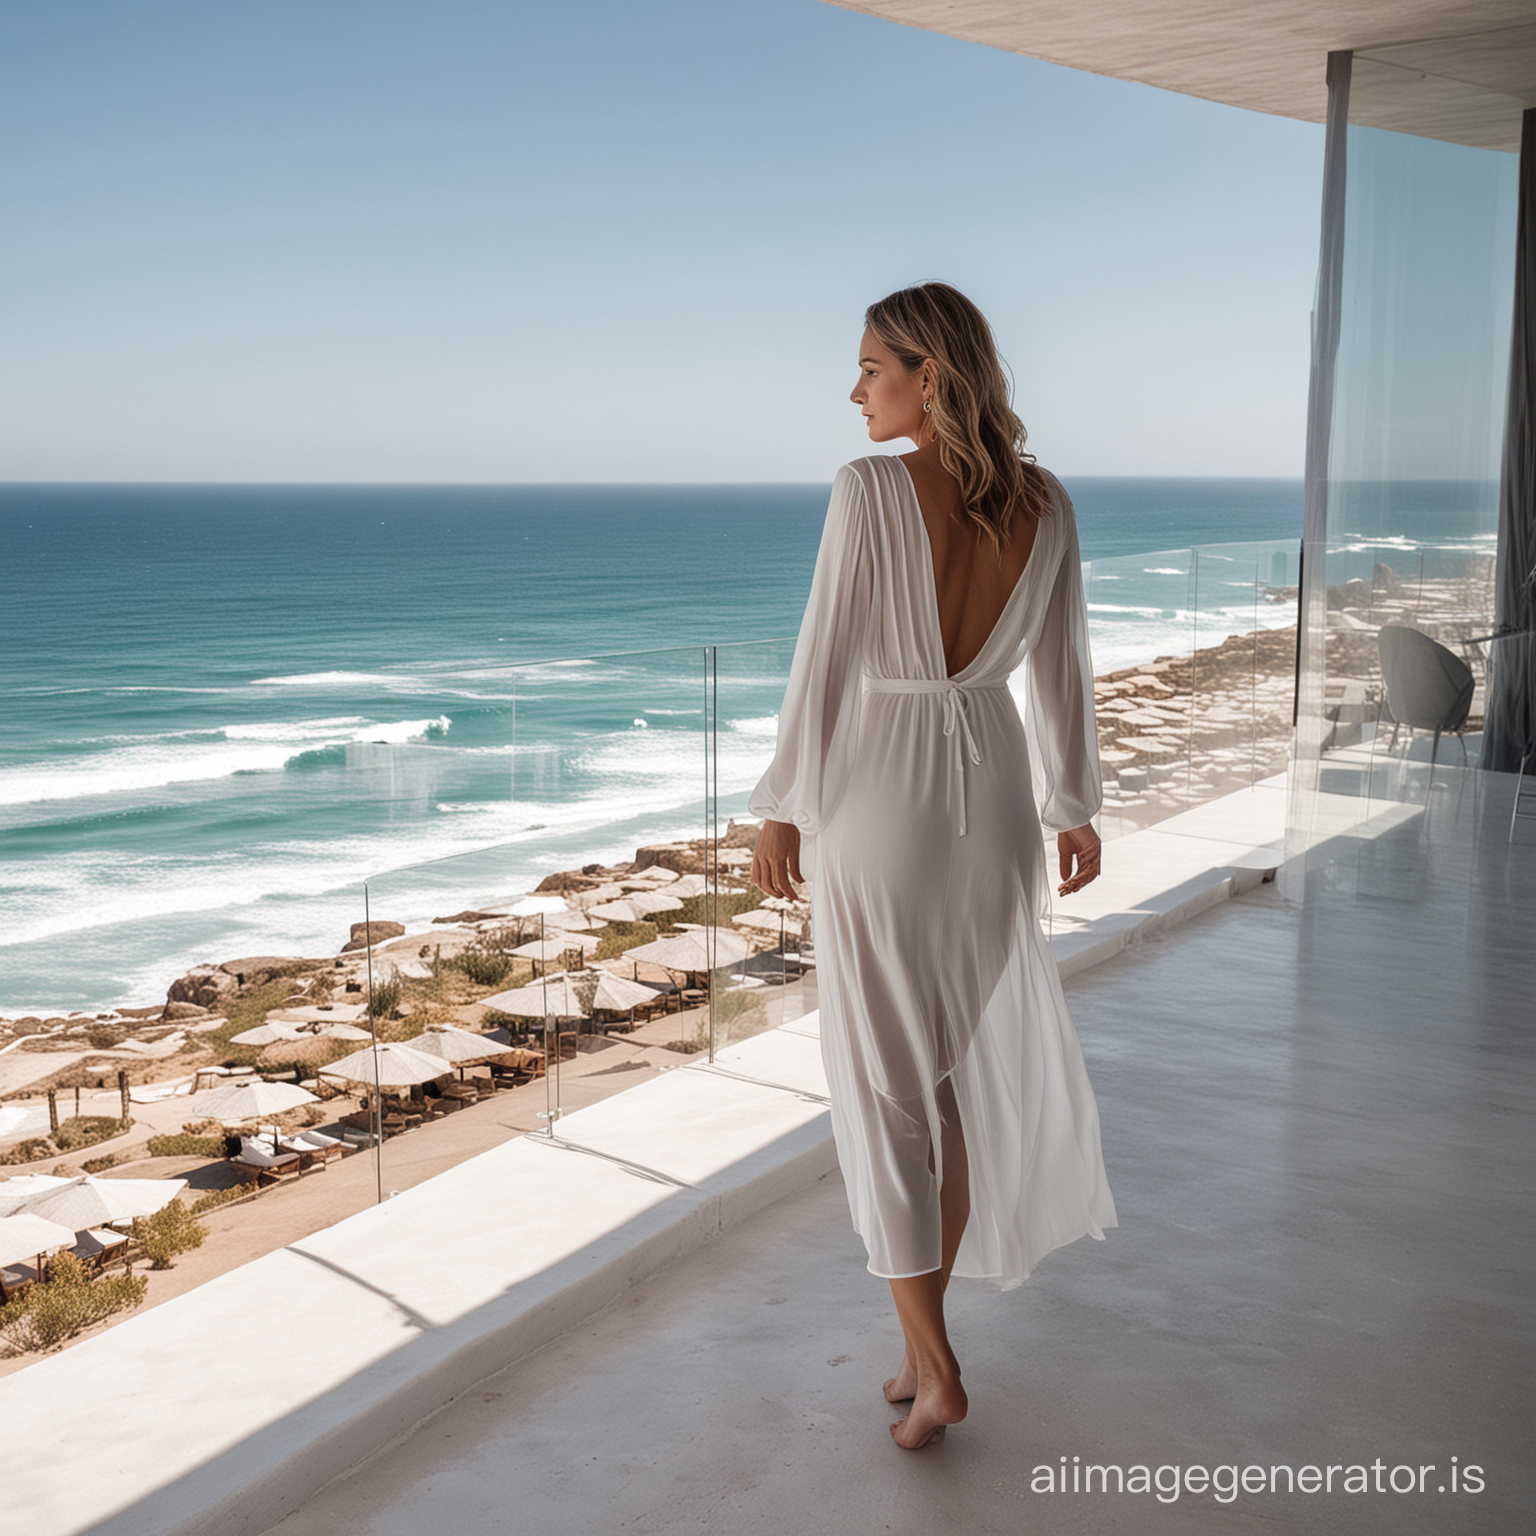 botique hotel spa, with woman back to the camera wearing a sleek semi transparent white dress. with a view to the sea



